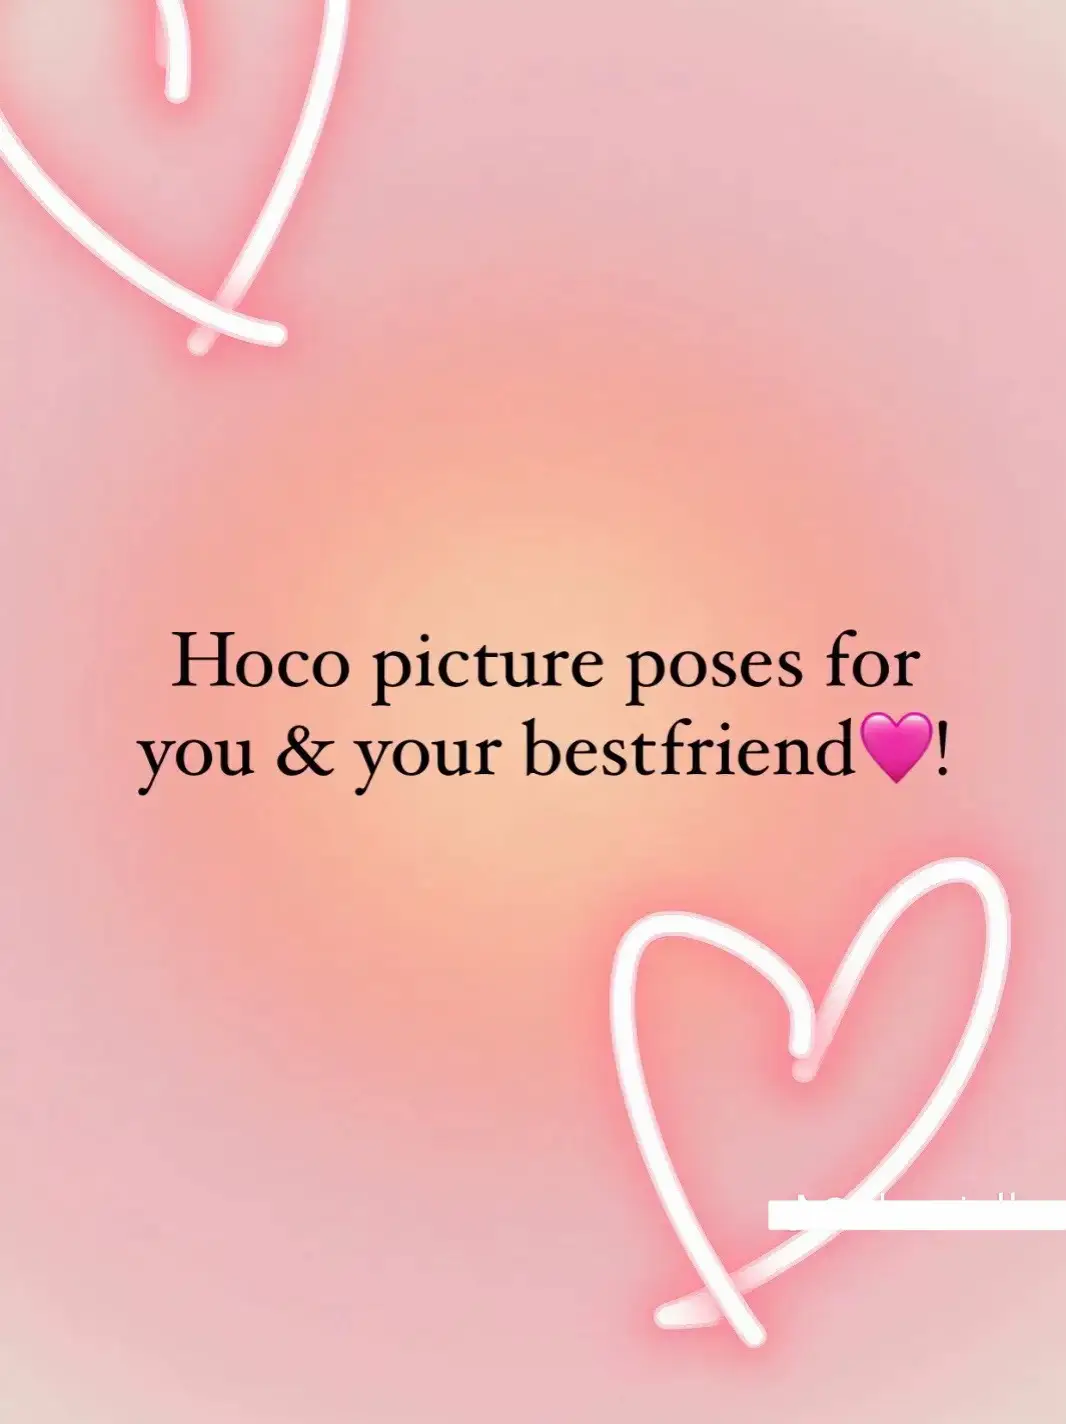  A picture of a heart with the words "Hoco picture poses for you & your bestfriend" written on it.